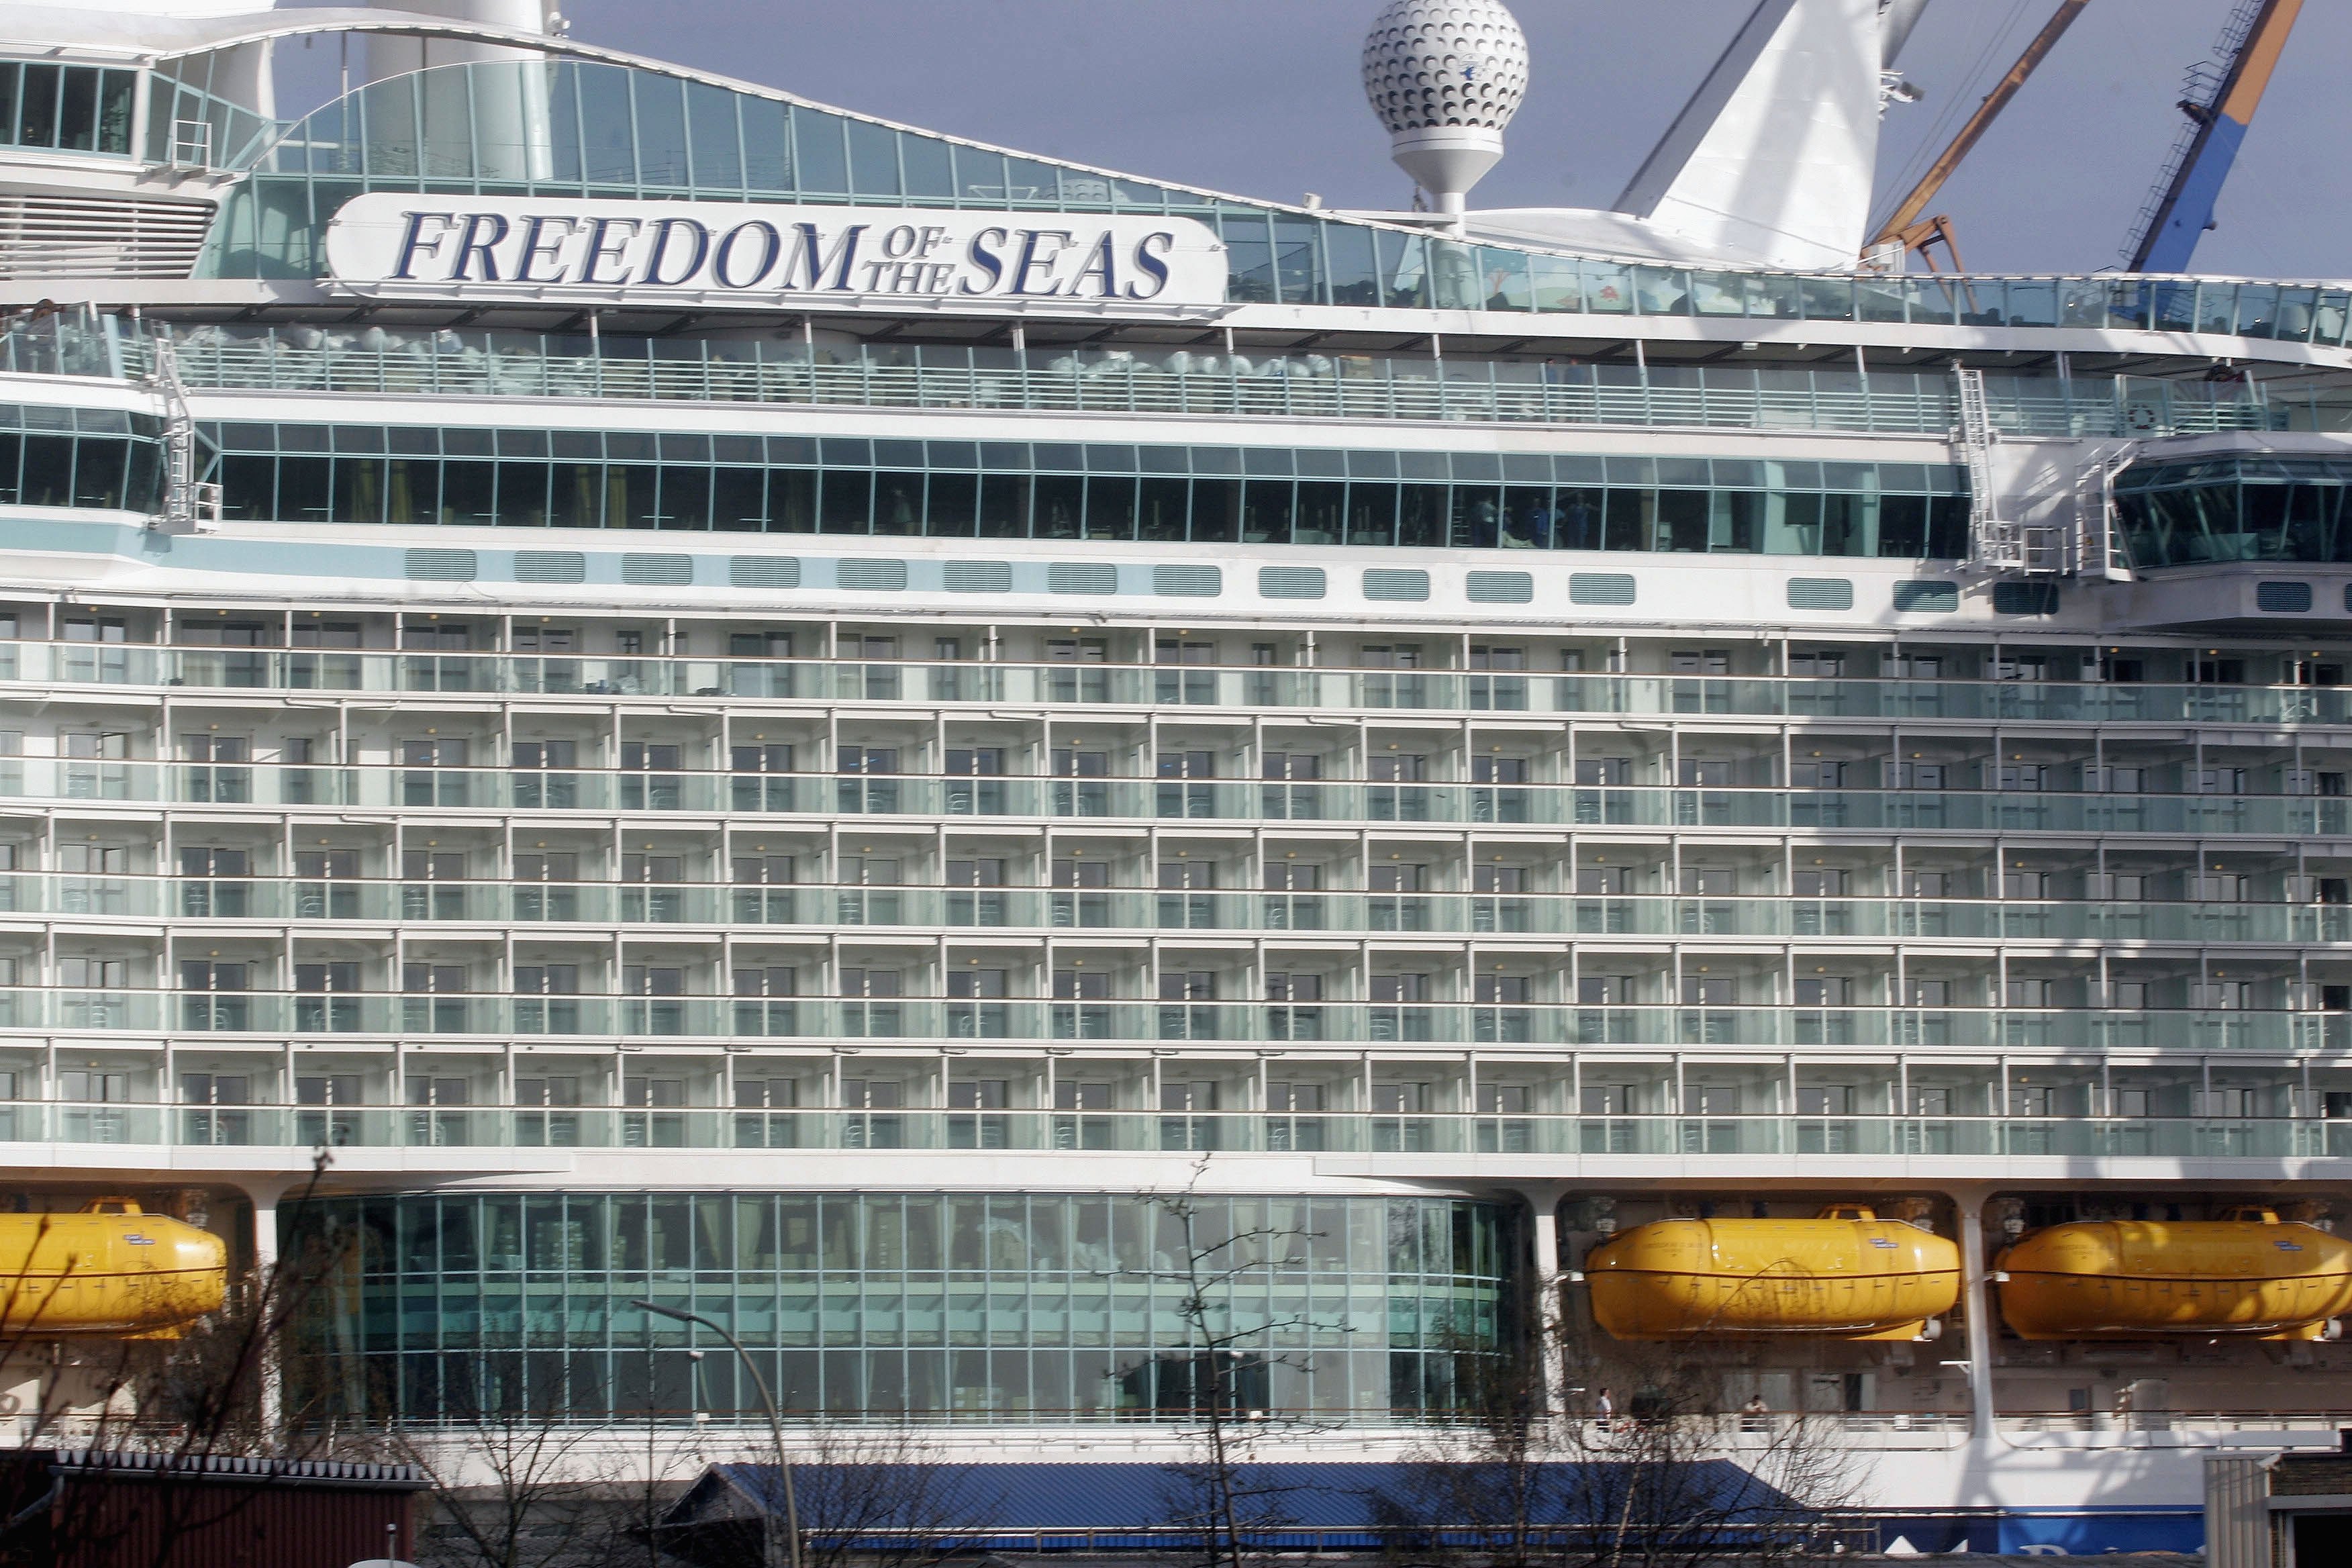 The Royal Caribbean's "Freedom of the Seas" cruise ship enters the docks of the Blohm und Voss shipyard at the port of Hamburg on April 17, 2006 in Hamburg, northern Germany. (Photo by Lutz Bongarts/Getty Images)